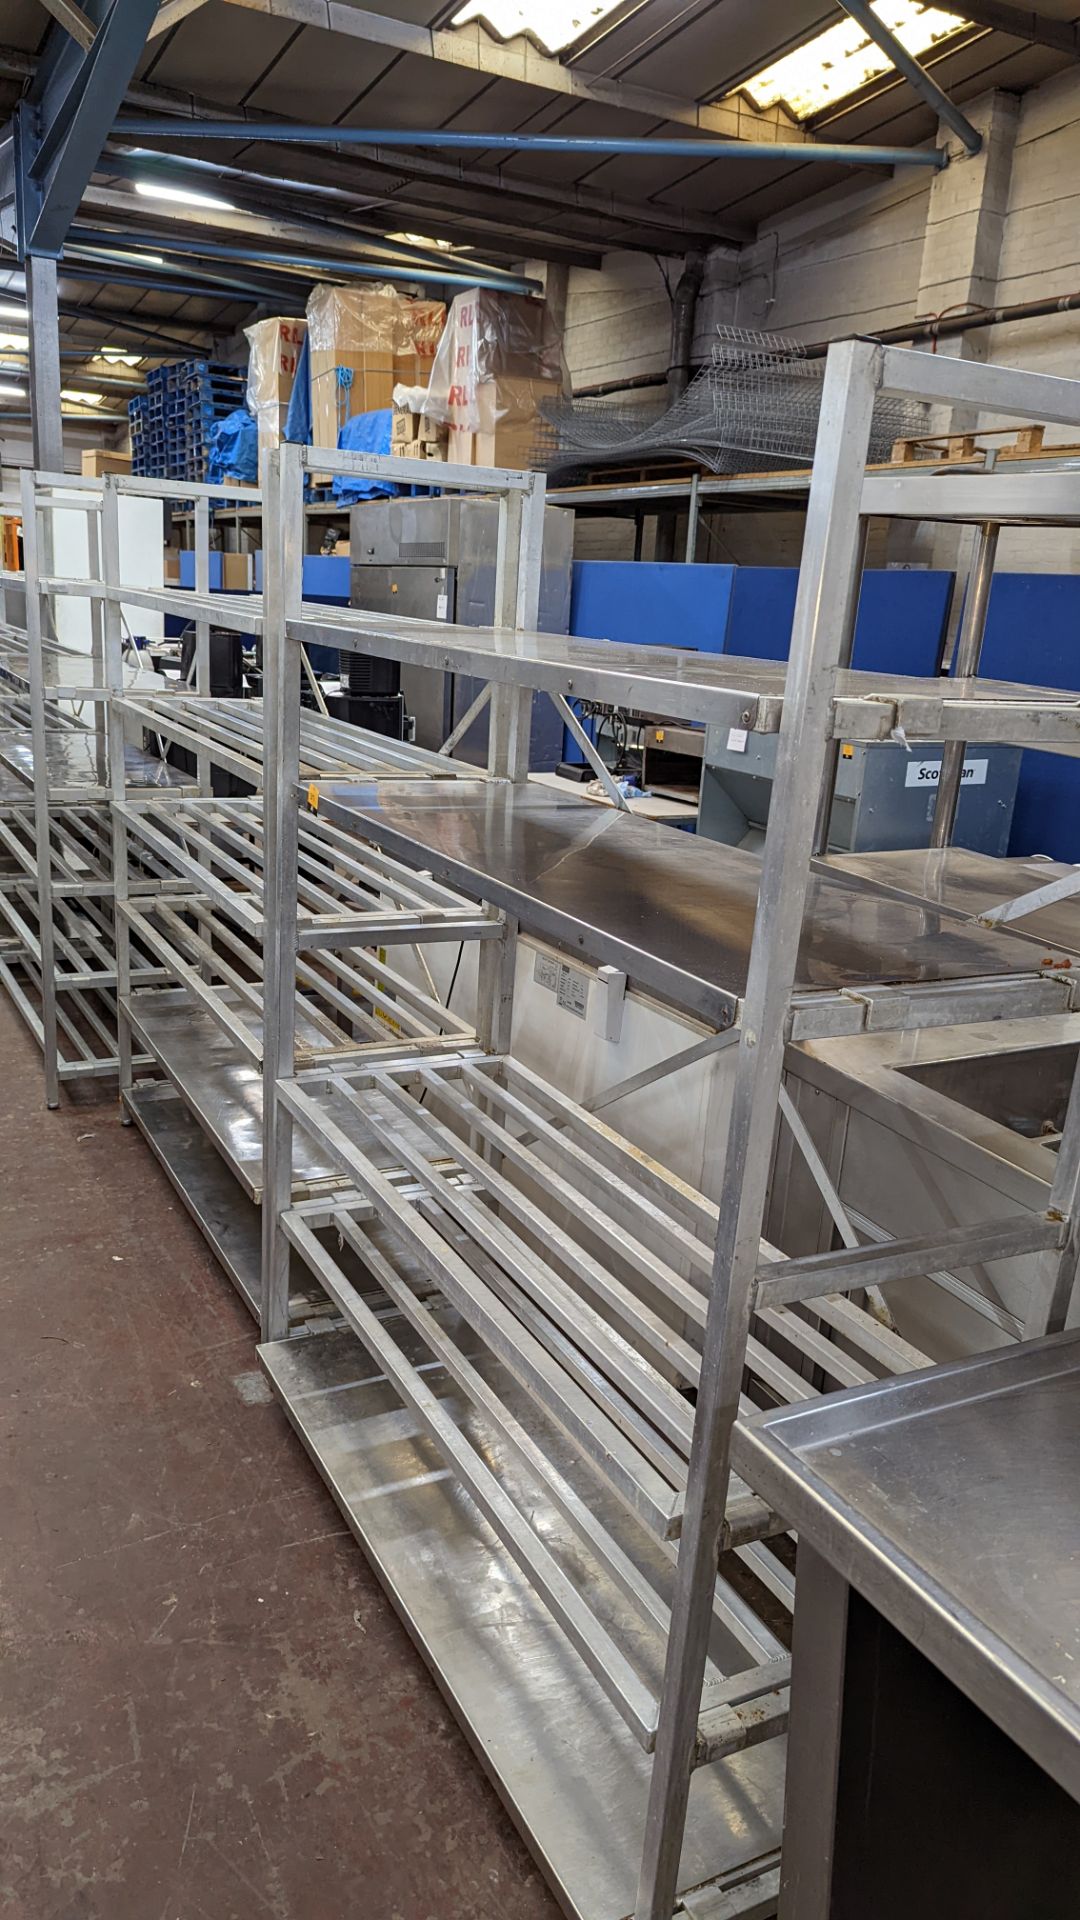 2 freestanding bays of cold store shelving, each being approx. 148cm wide, one with 5 shelves & one